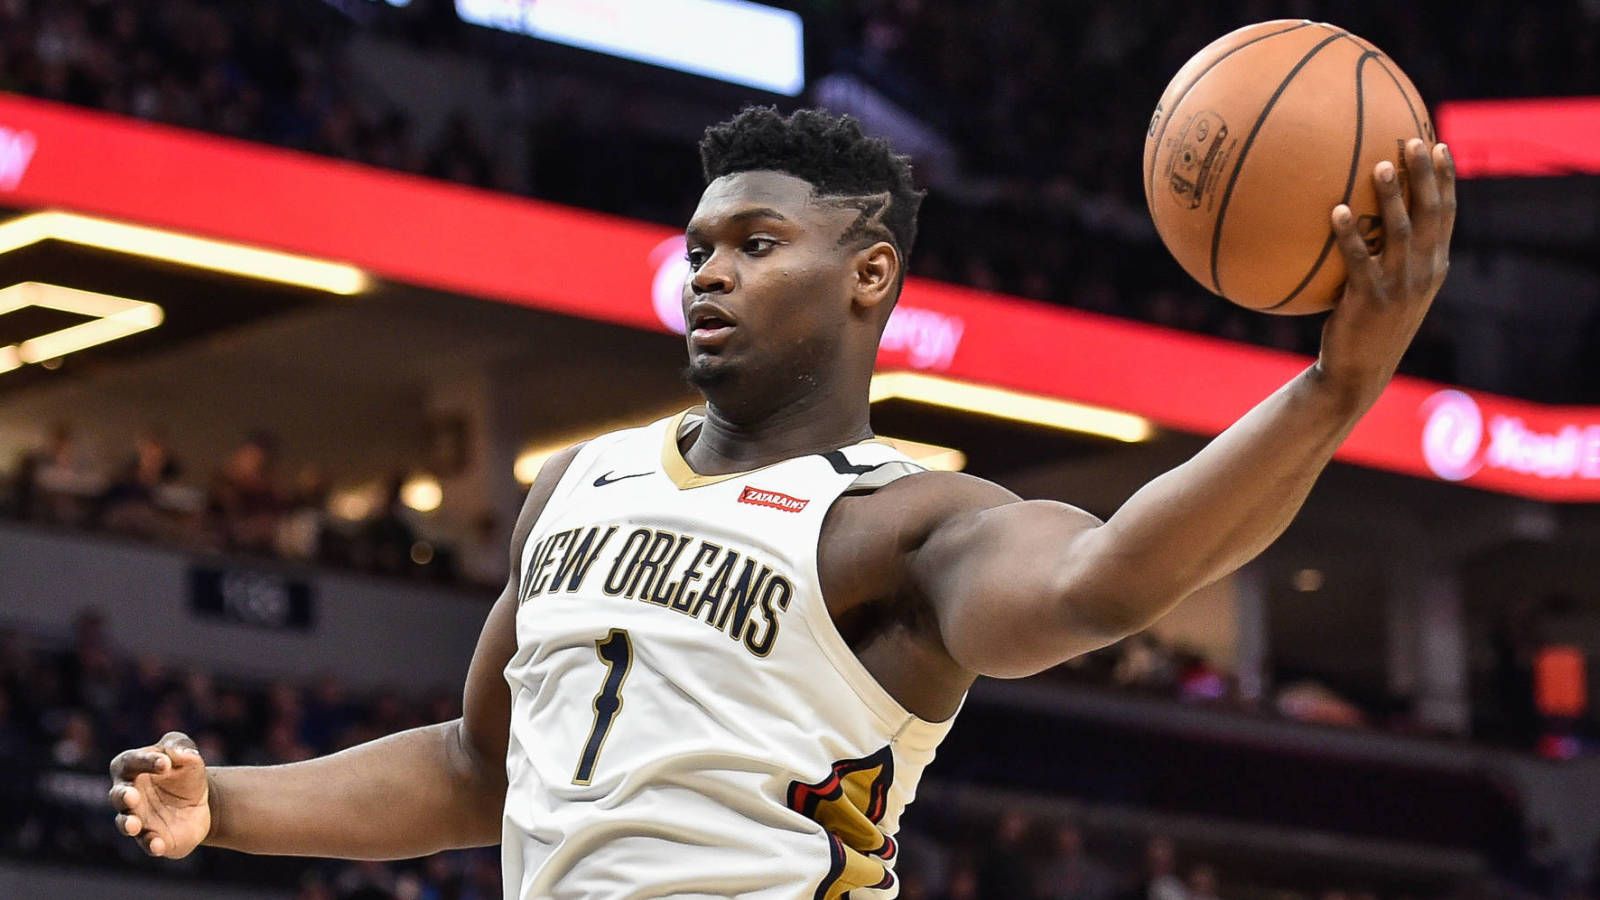 Fans react to 'NBA 2K21' trailer featuring Zion Williamson